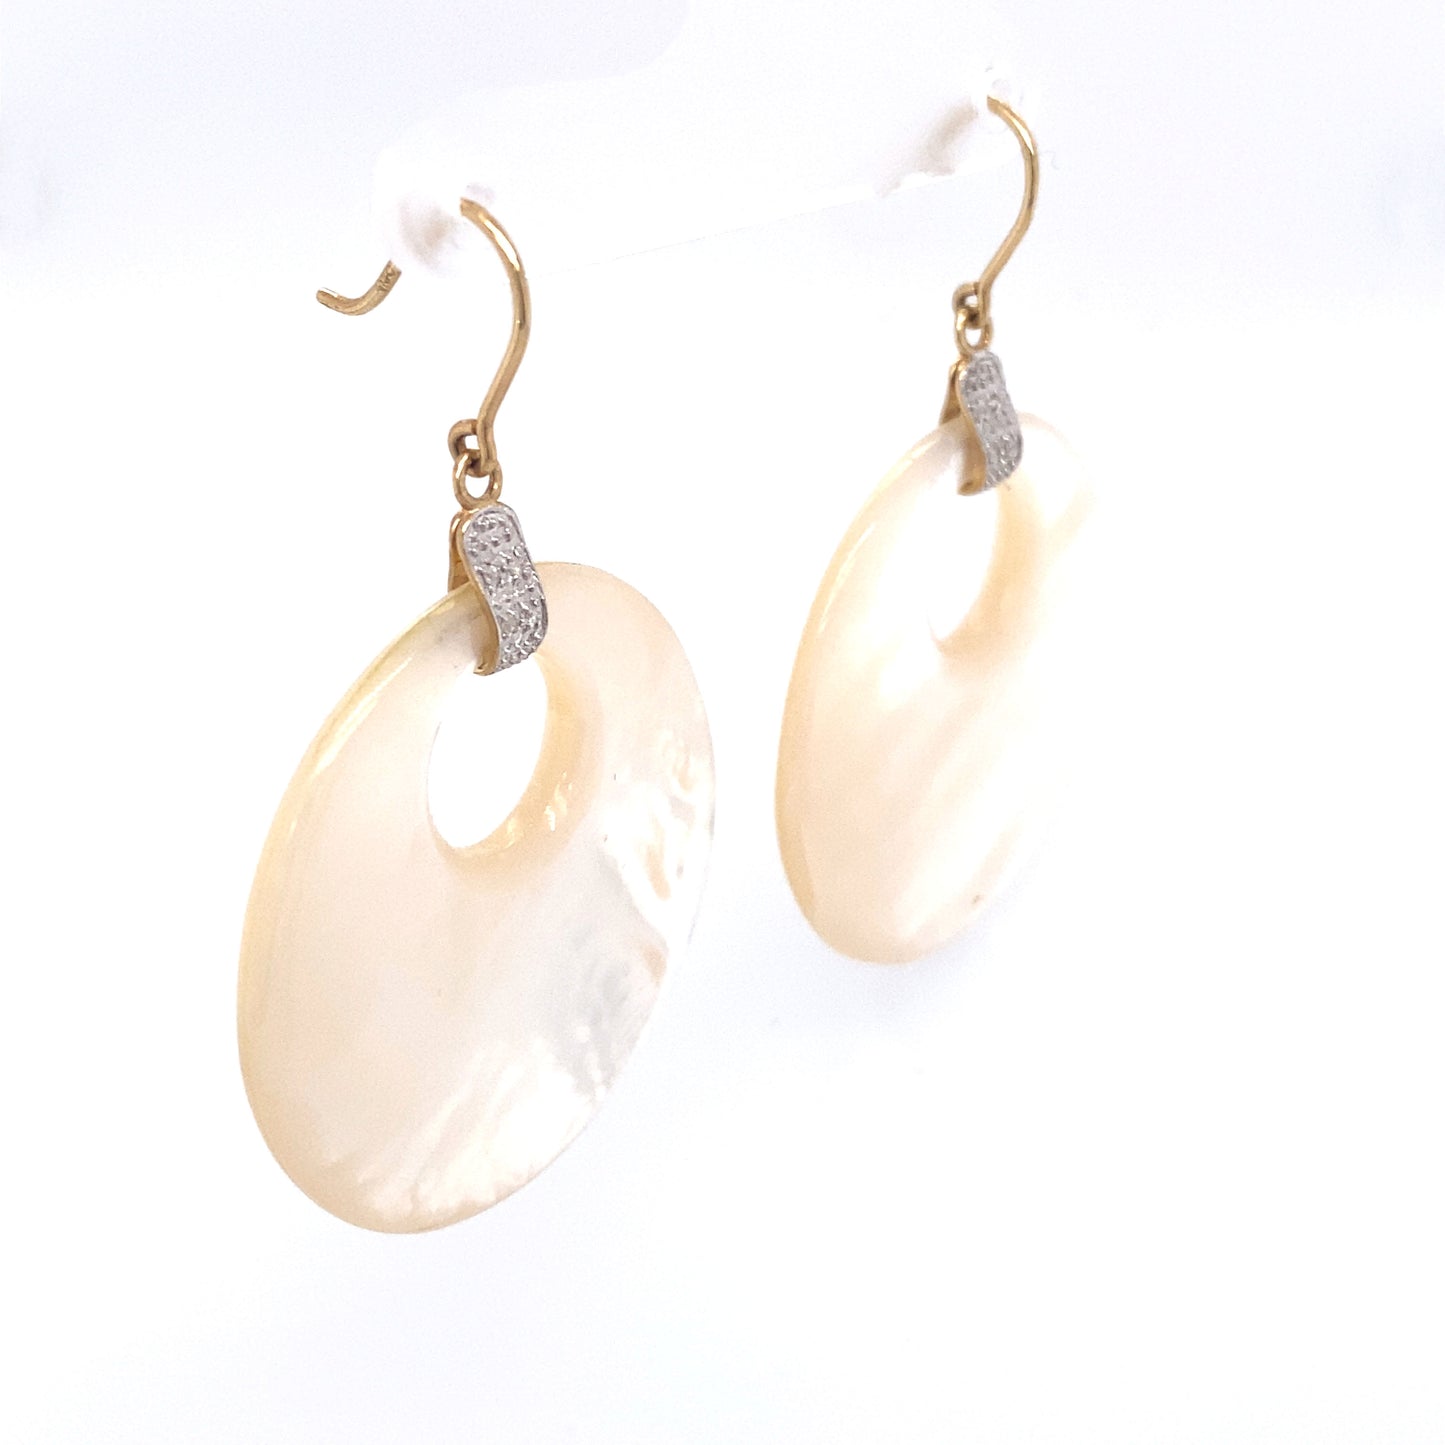 Circa 1980s Mother of Pearl and Diamond Circle Dangle Earrings in 14K Gold